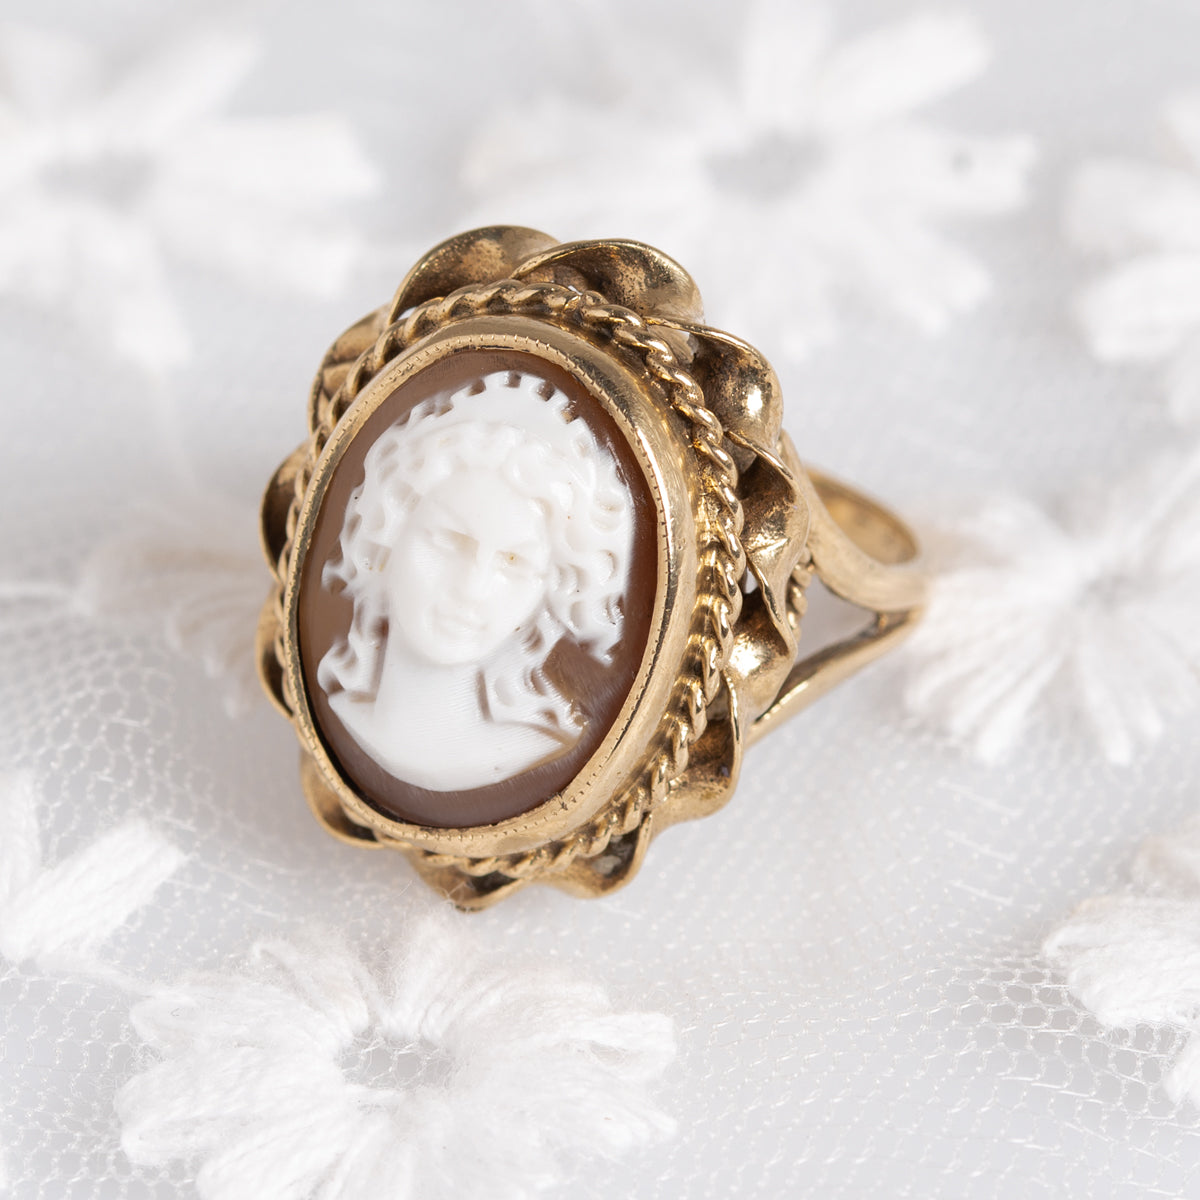 Vintage 9ct Gold Cameo Ring Female Portrait 1970 s Hallmarked UK Size M (A1354)